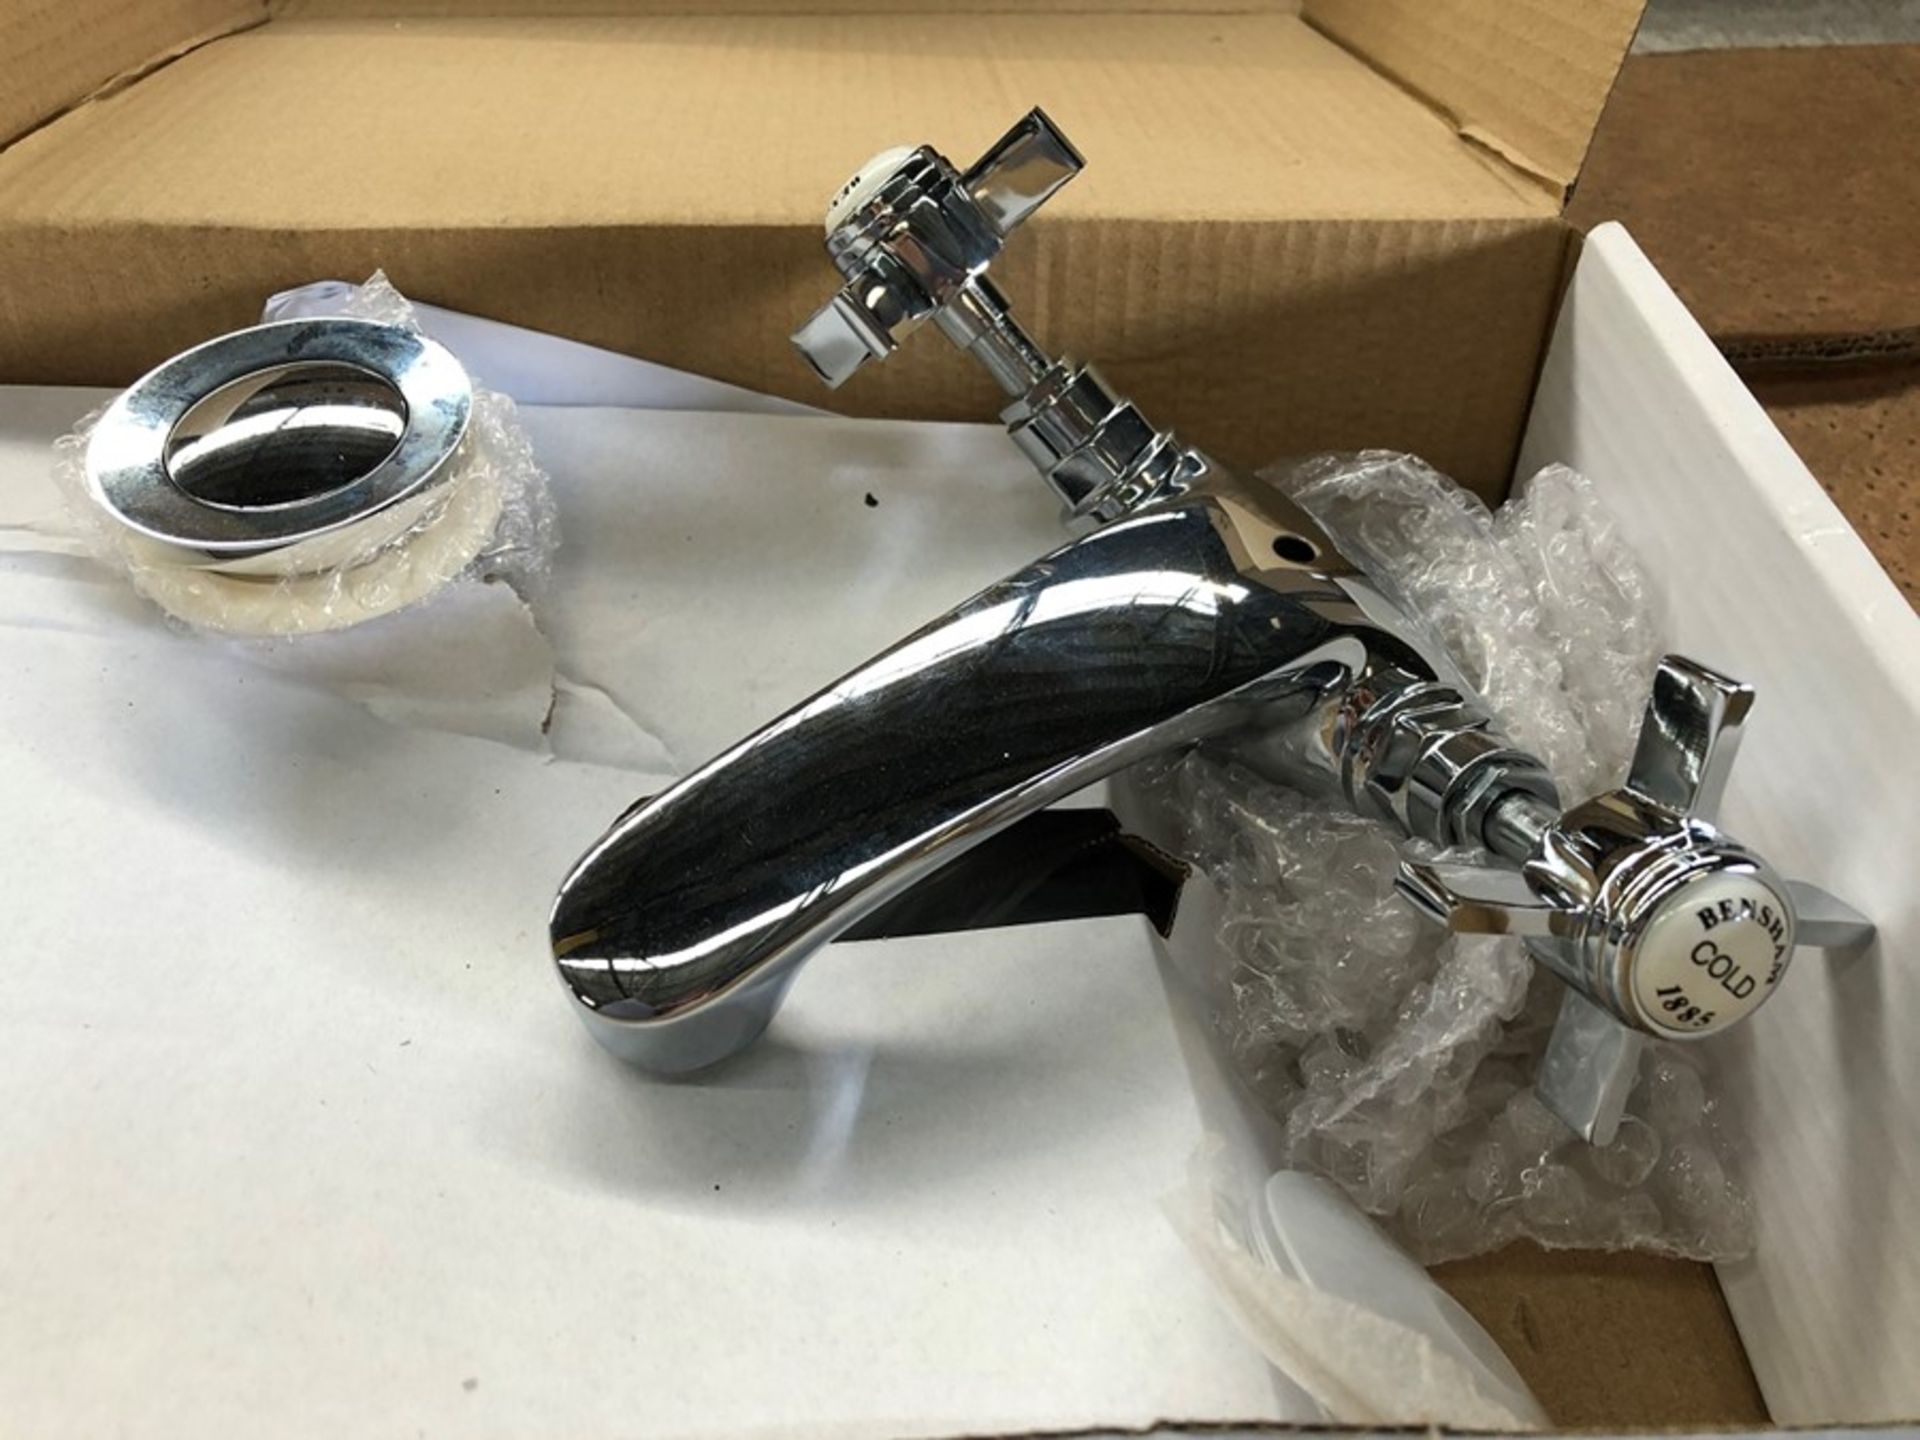 6 X ‘BENSHAM’ TRADITIONAL BASIN MIXER TAPS WITH POP UP WASTE & FITTINGS. BOXED - Image 2 of 2